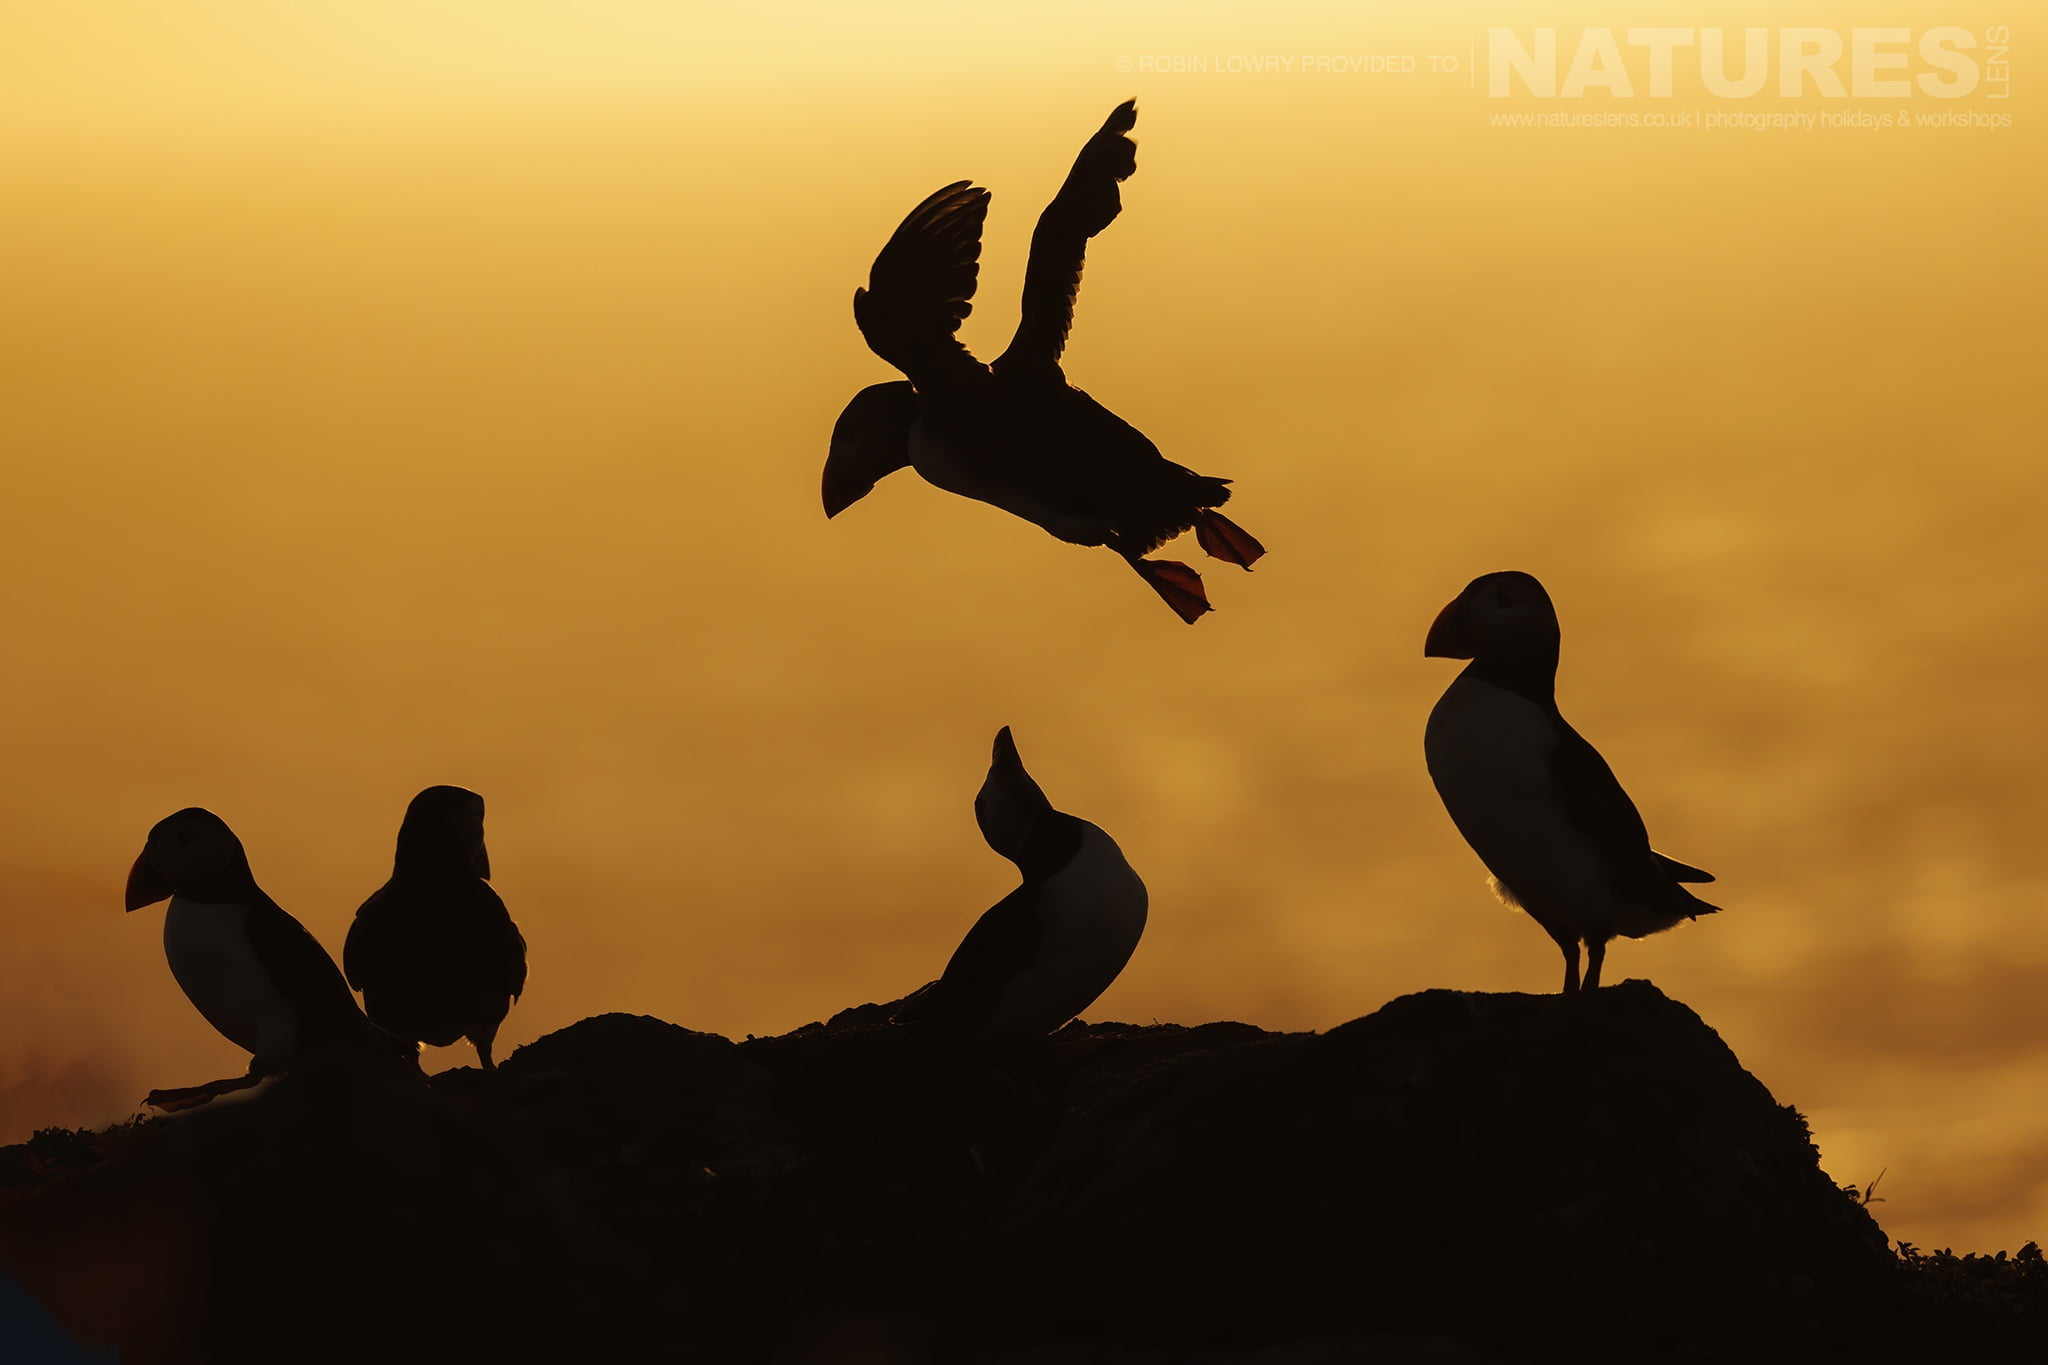 Skomer always has the potential for delivering something spectacular at sunset - this image was captured during the NaturesLens Comical Puffins of Skomer Island photography holiday